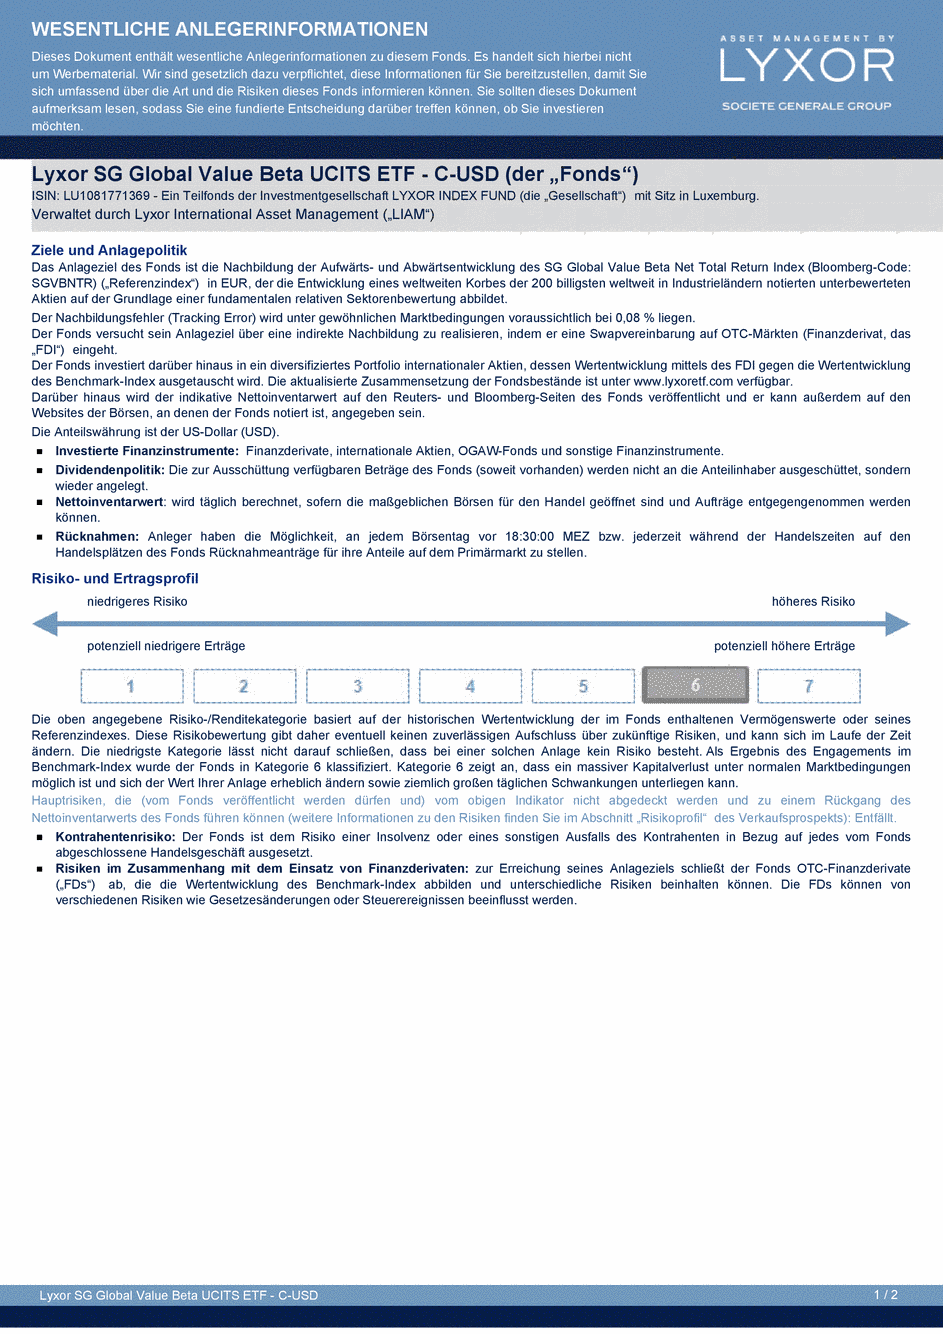 DICI Lyxor SG Global Value Beta UCITS ETF - Acc - 15/04/2015 - Allemand